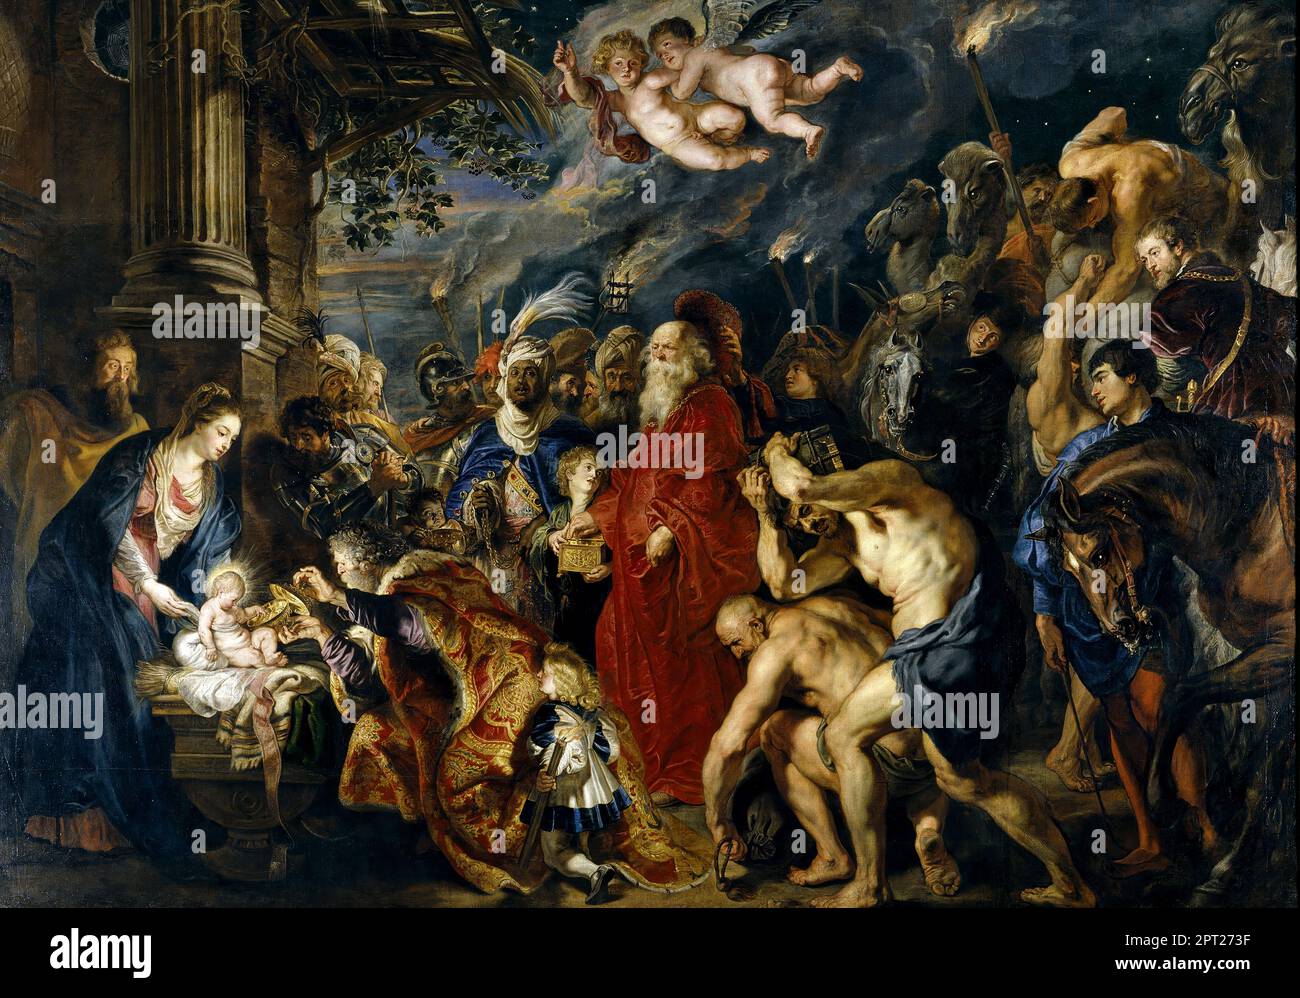 The Adoration of the Magi by Peter Paul Rubens Oil on canvas Stock Photo